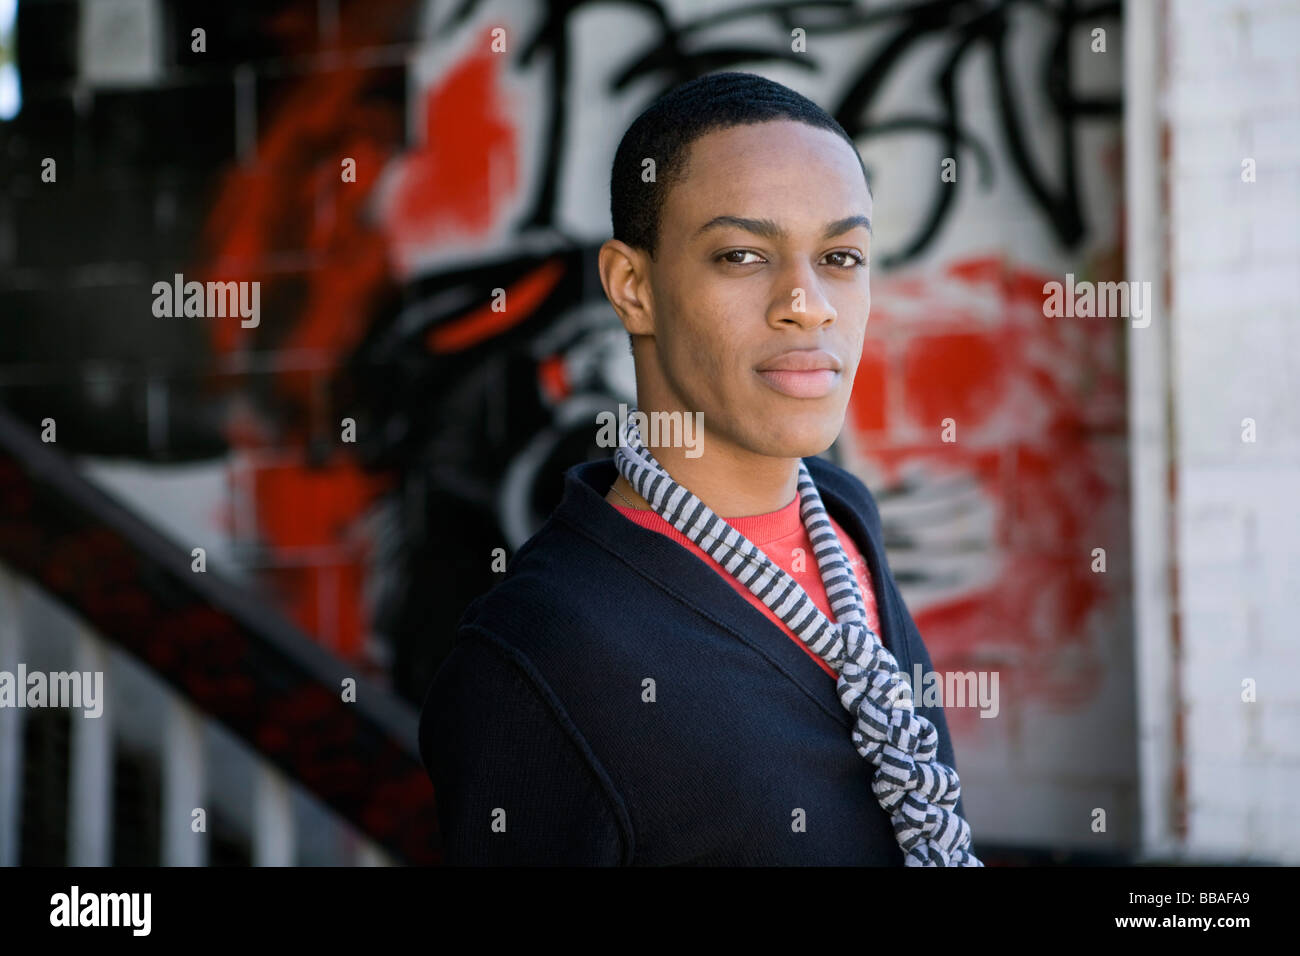 Portrait of a young man standing in front of graffiti on a wall Stock Photo